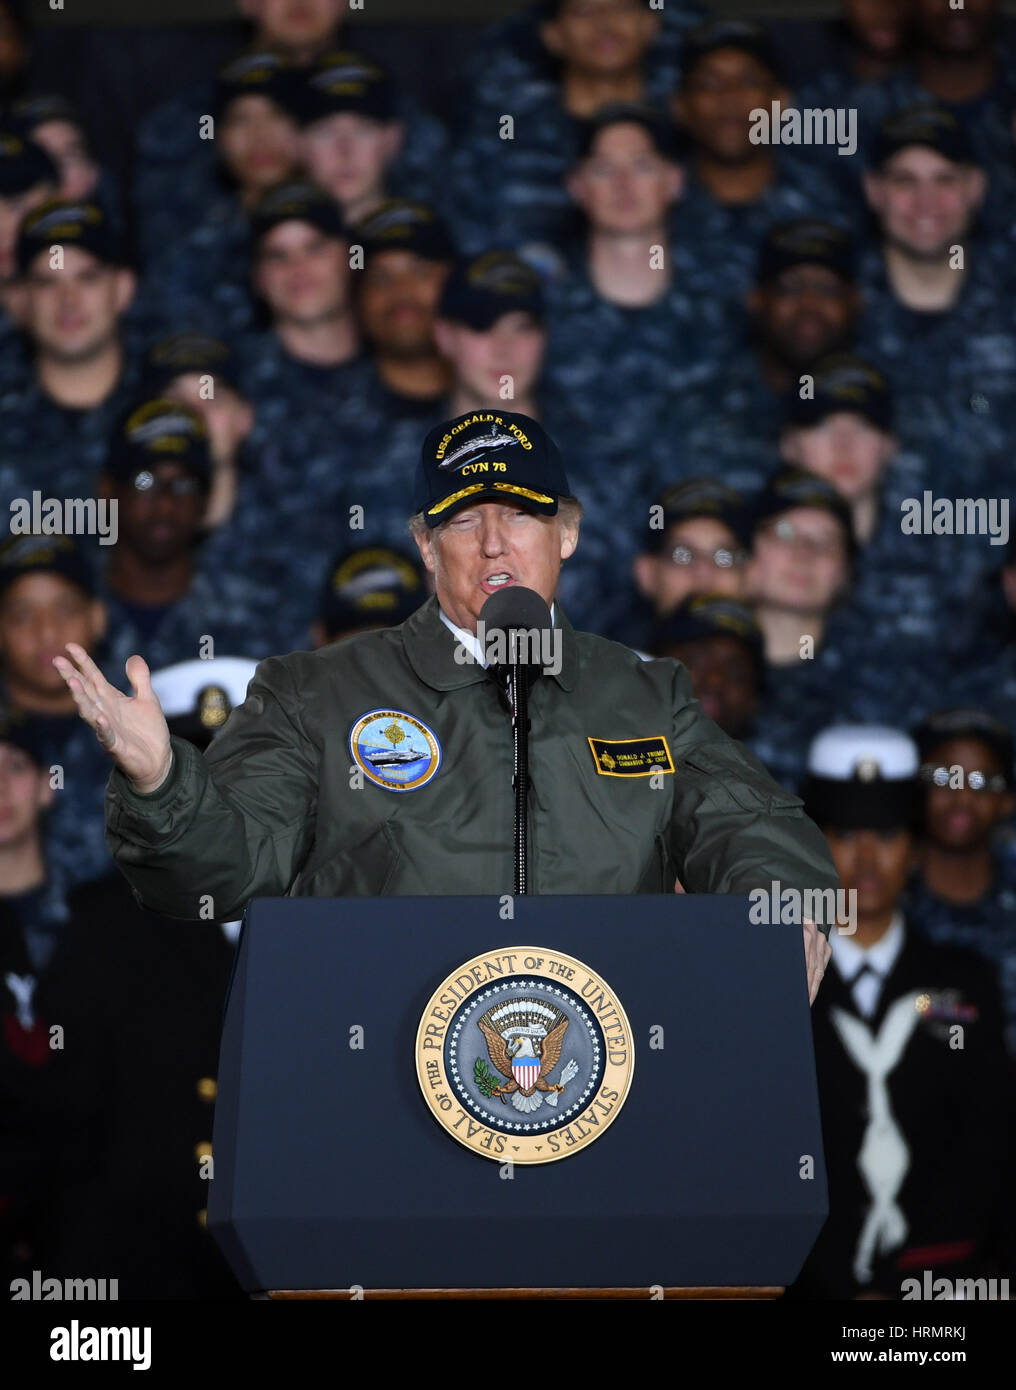 Newport News, USA. 2nd Mar, 2017. U.S. President Donald Trump delivers remarks aboard the pre-commissioned U.S. Navy aircraft carrier Gerald R. Ford in Newport News, Virginia, the United States, March 2, 2017. Credit: Yin Bogu/Xinhua/Alamy Live News Stock Photo